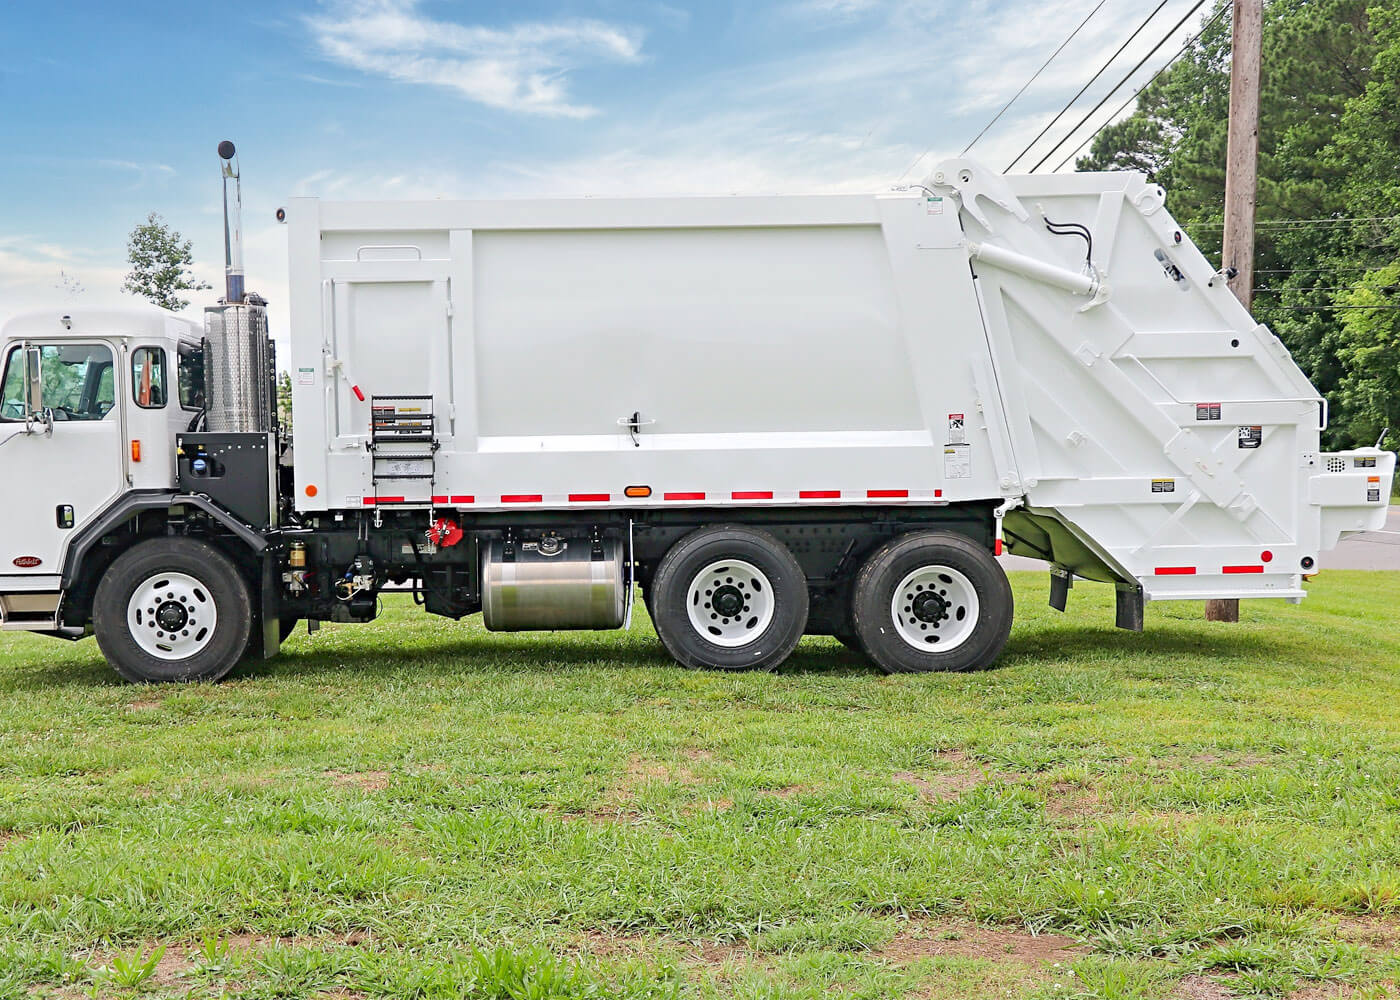 Commercial rear loaders for commercial garbage truck collection